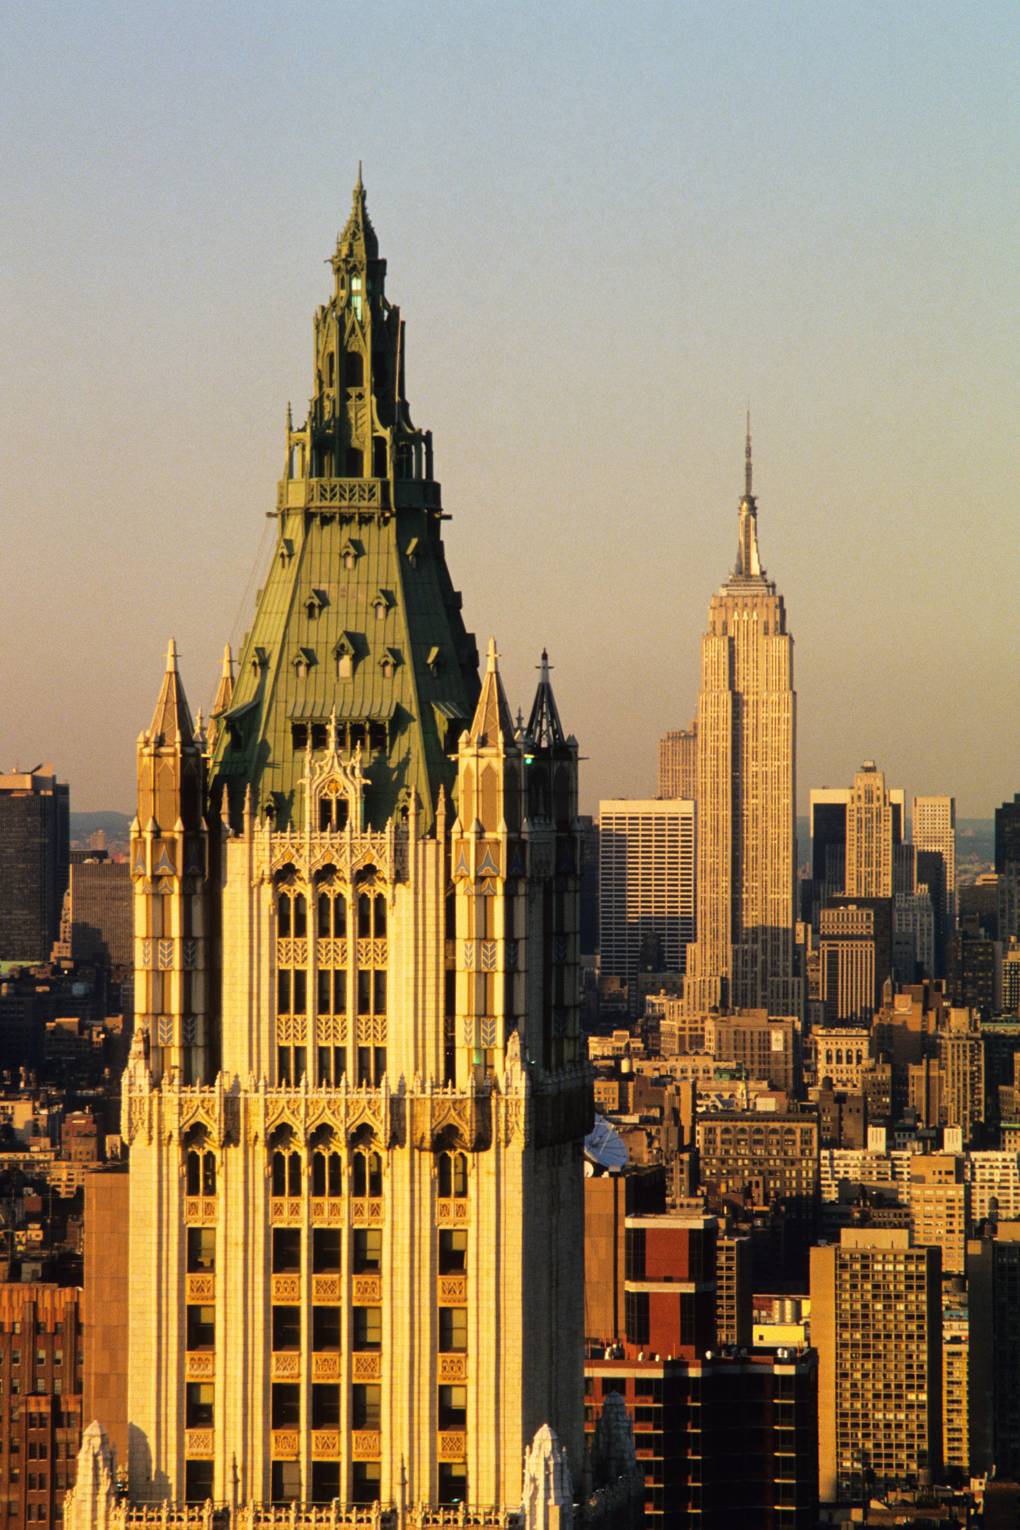 Woolworth Building on Broadway